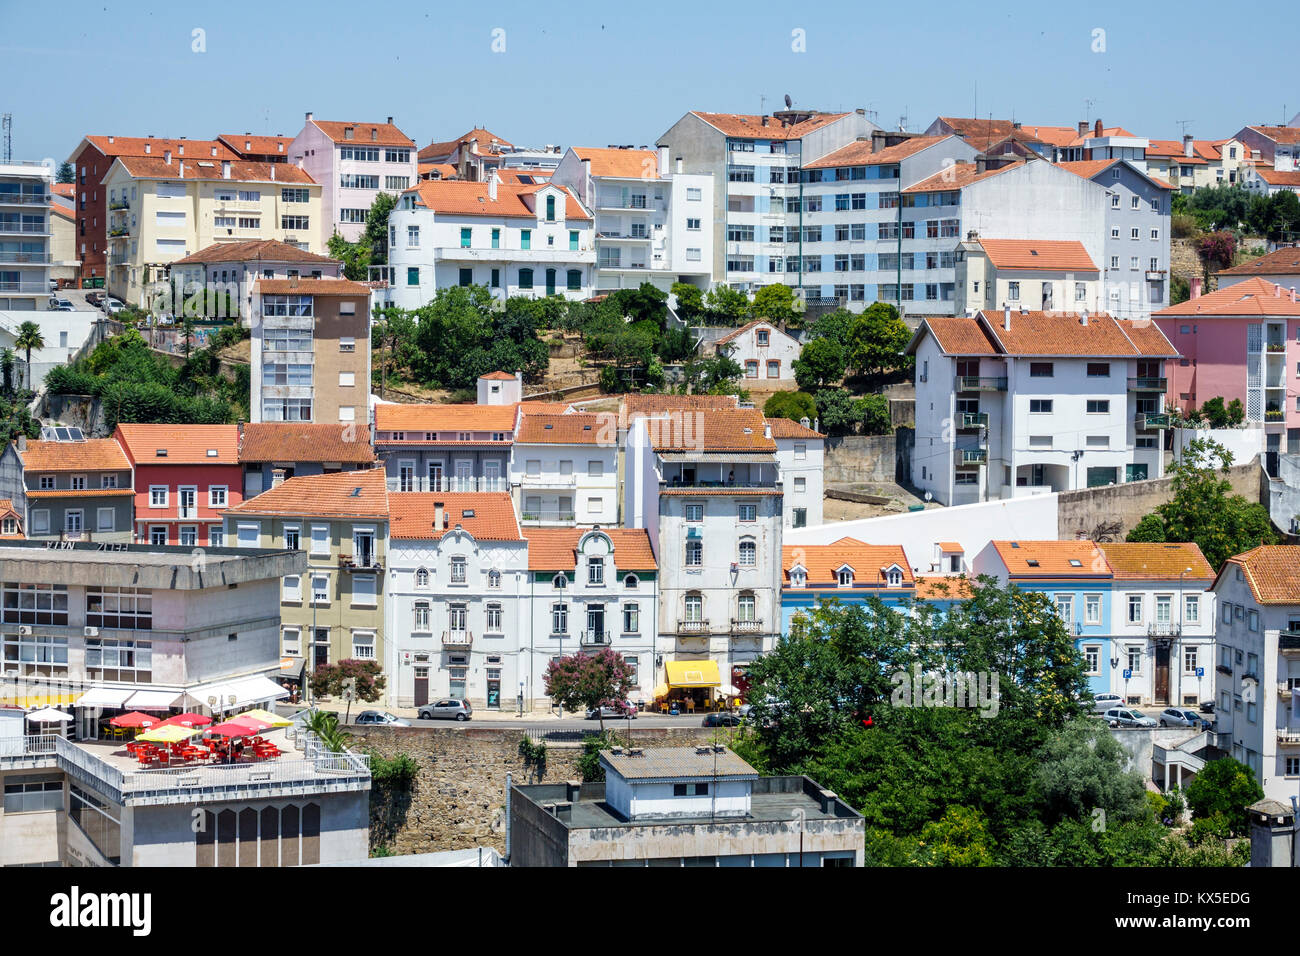 Coimbra Portugal,University of Coimbra,view,city skyline,buildings,rooftops,hillside,Hispanic,immigrant immigrants,Portuguese,PT170704035 Stock Photo